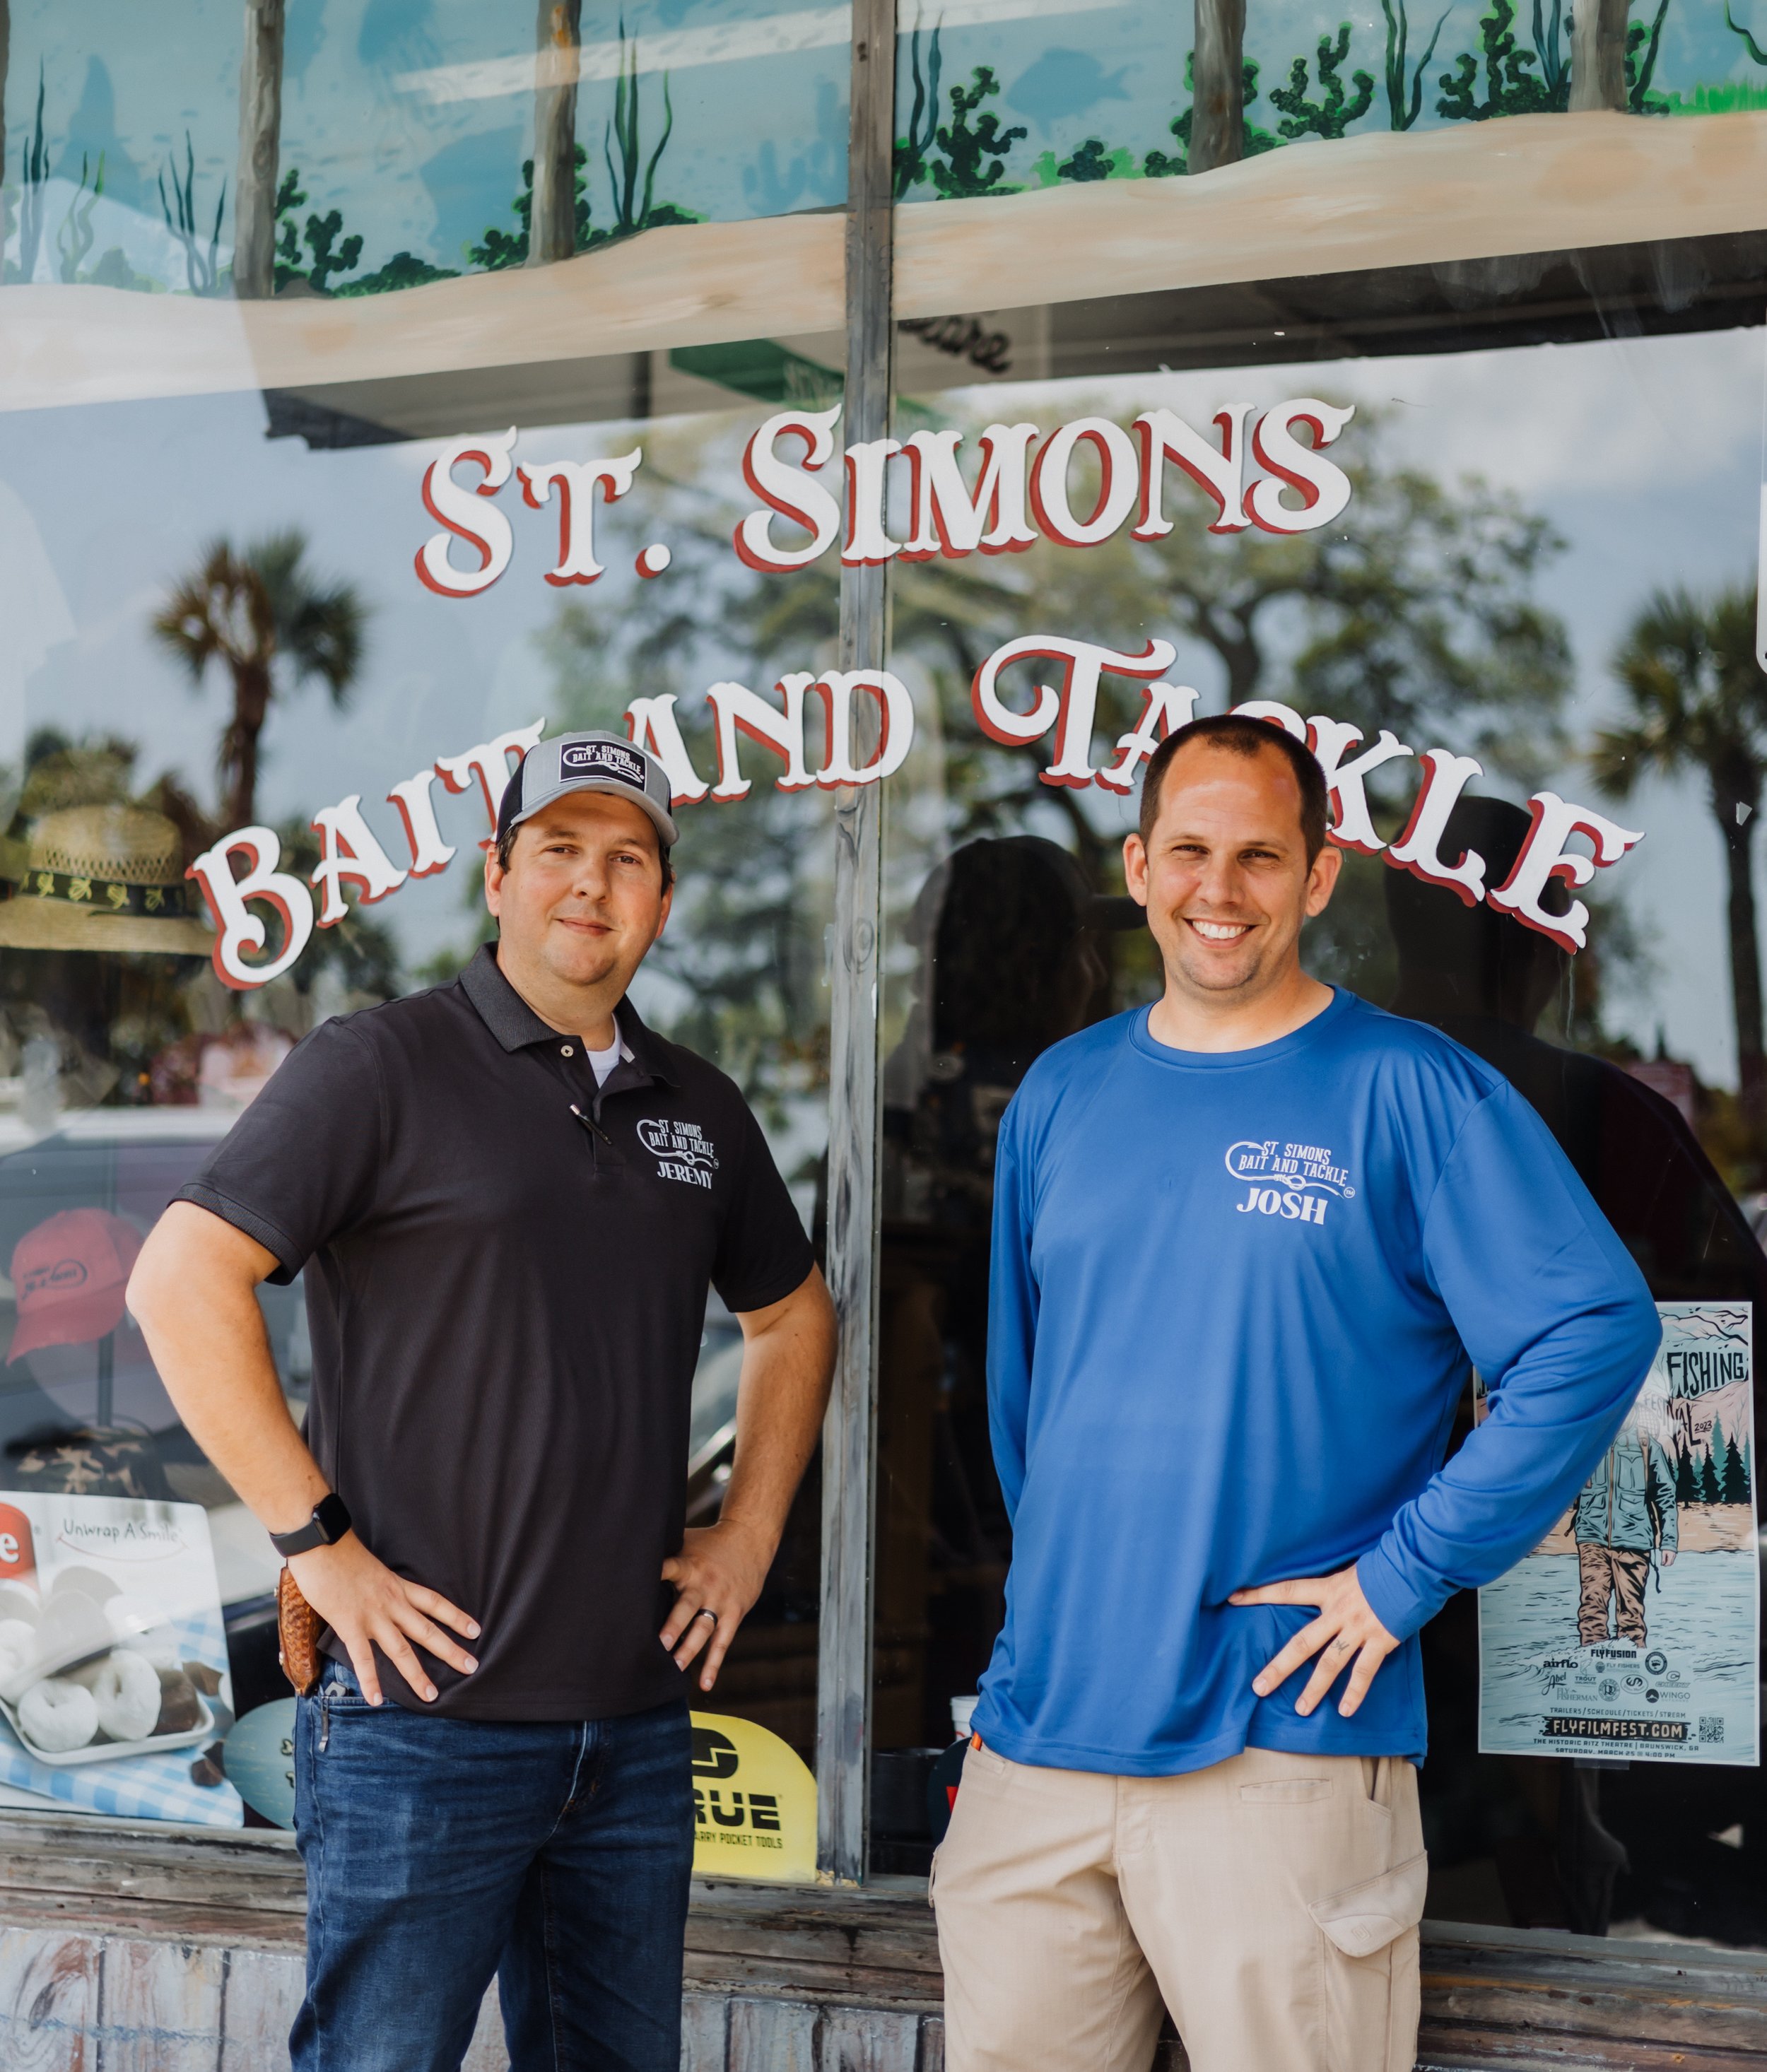 St. Simons Bait and Tackle